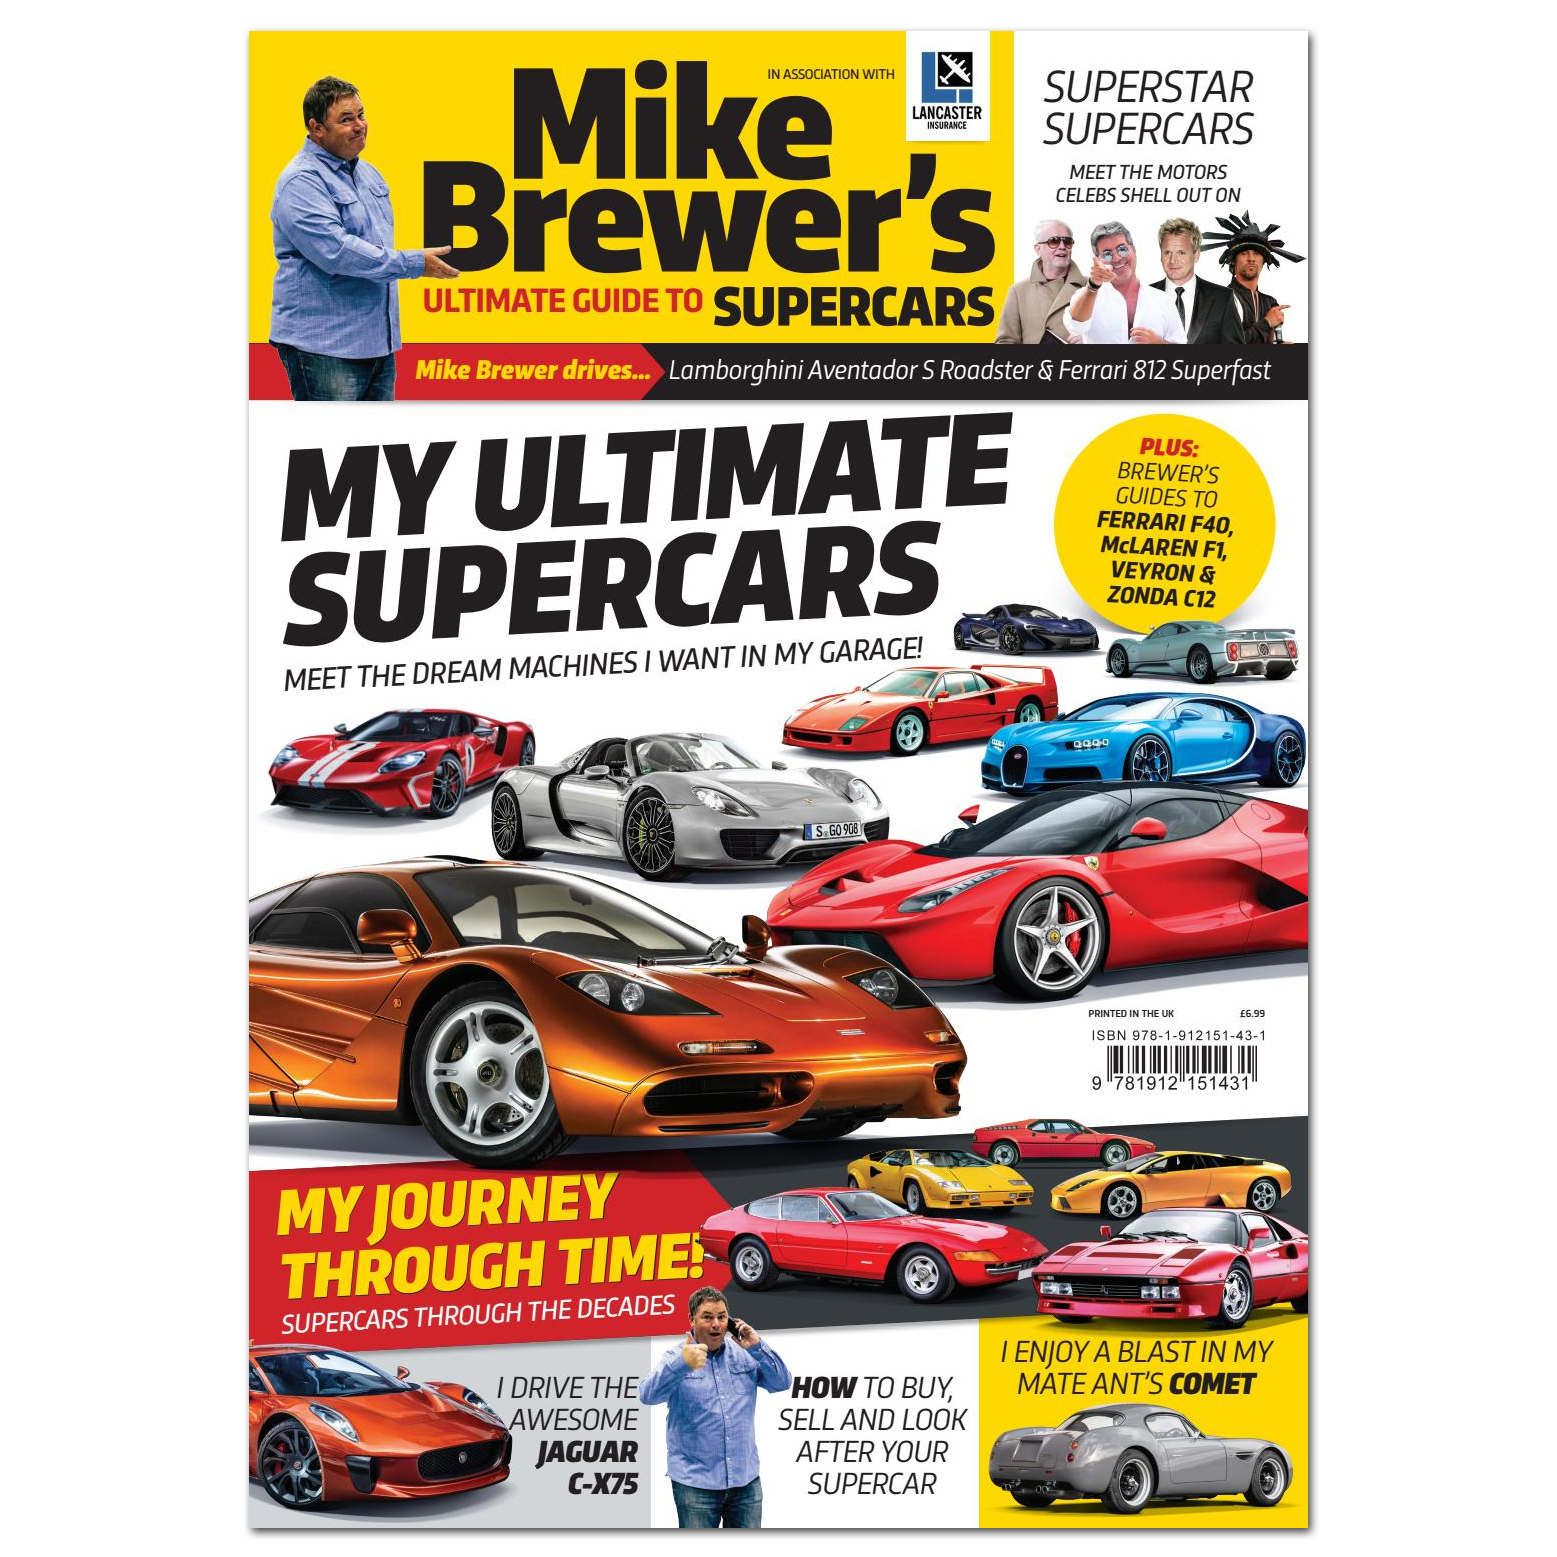 Mike Brewer's Ulimate Supercars